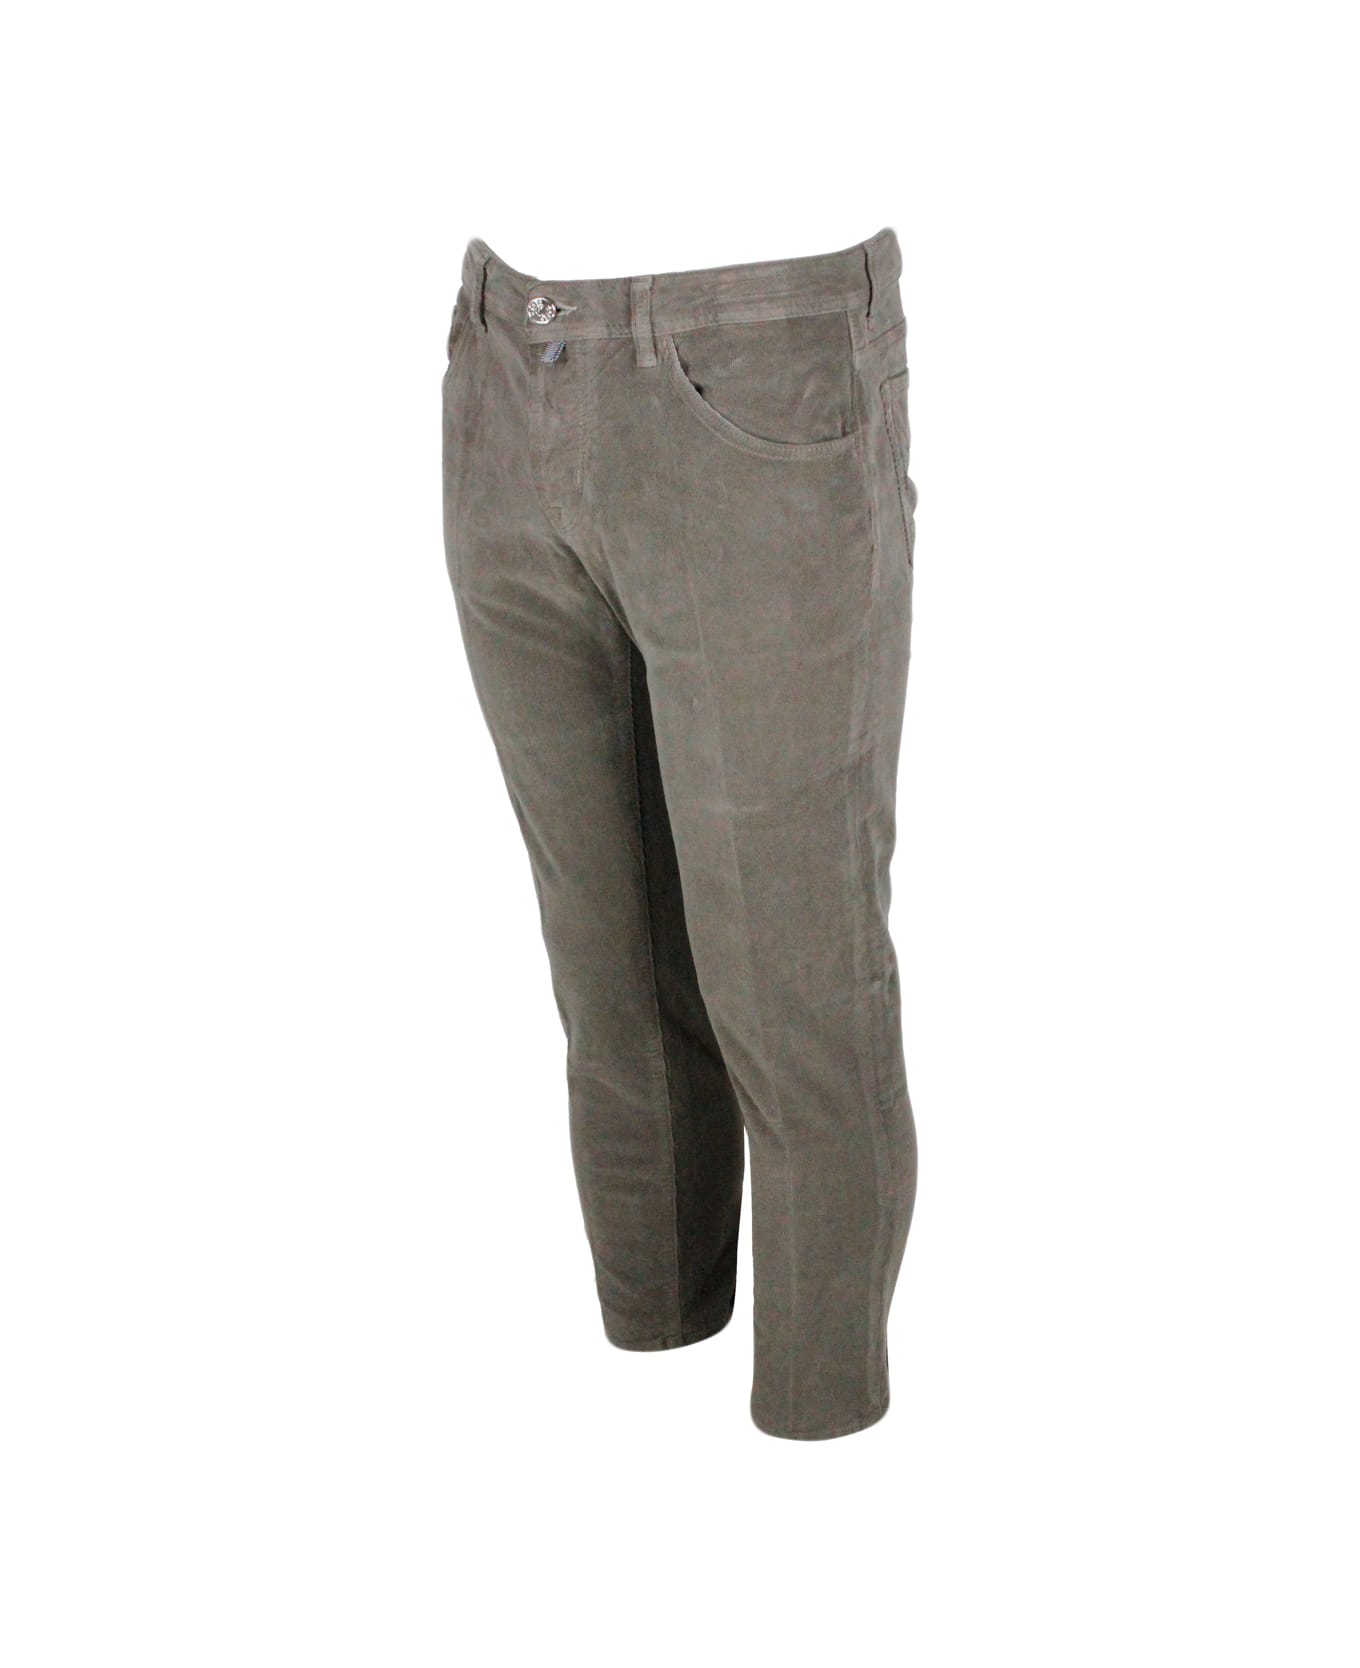 Jacob Cohen Histores Scott Trousers In Luxury Edition In Soft 1000 Striped Velvet With 5 Pockets With Closure Buttons. Slim Cropped Carrot Fit - Elephant grey